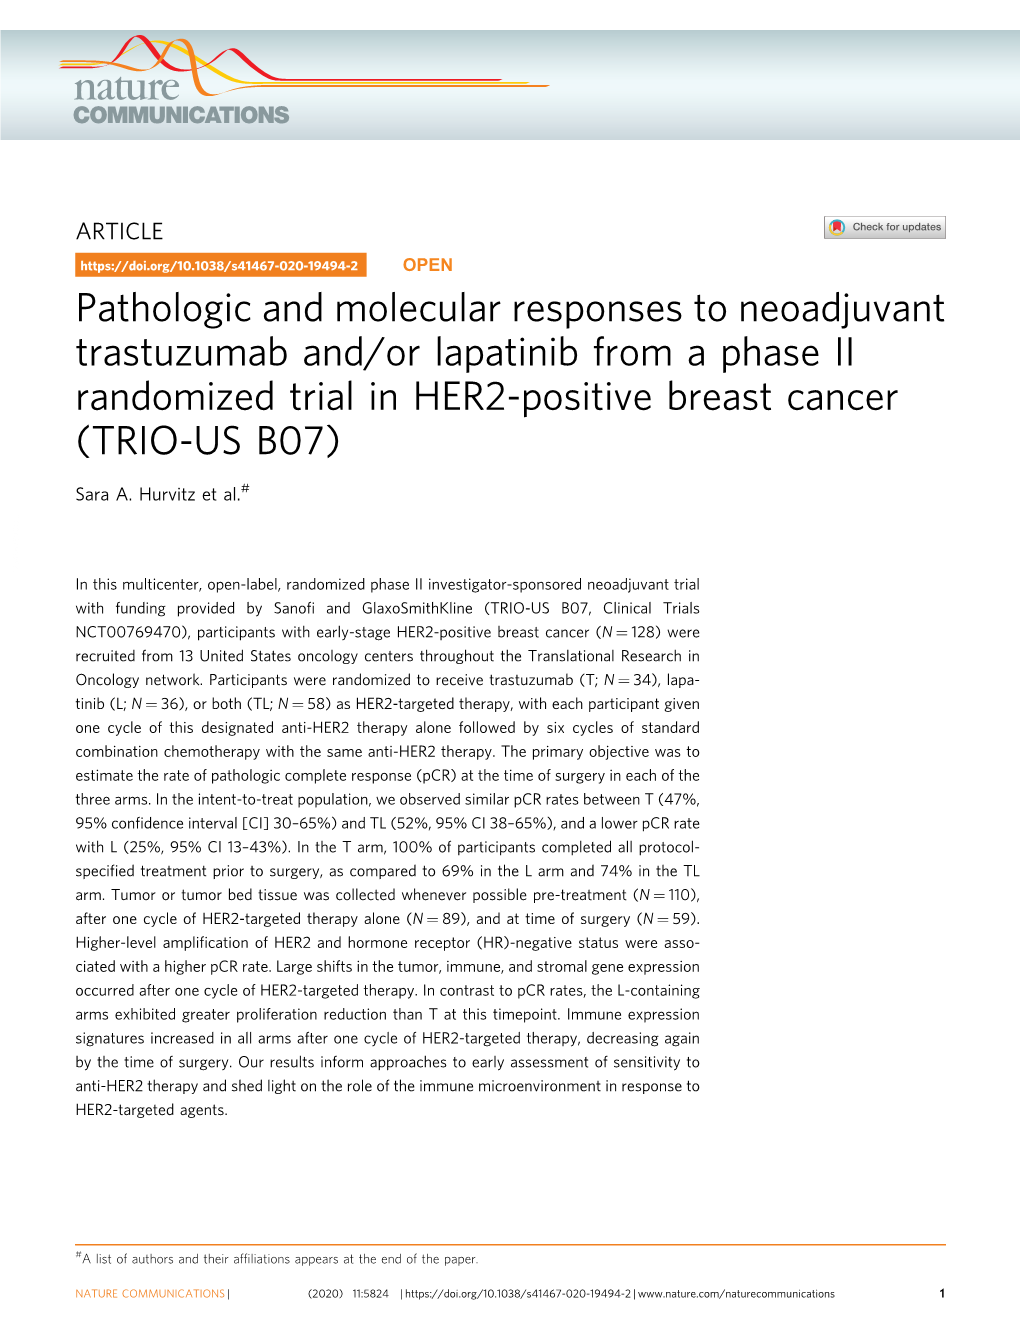 Pathologic and Molecular Responses to Neoadjuvant Trastuzumab And/Or Lapatinib from a Phase II Randomized Trial in HER2-Positive Breast Cancer (TRIO-US B07)